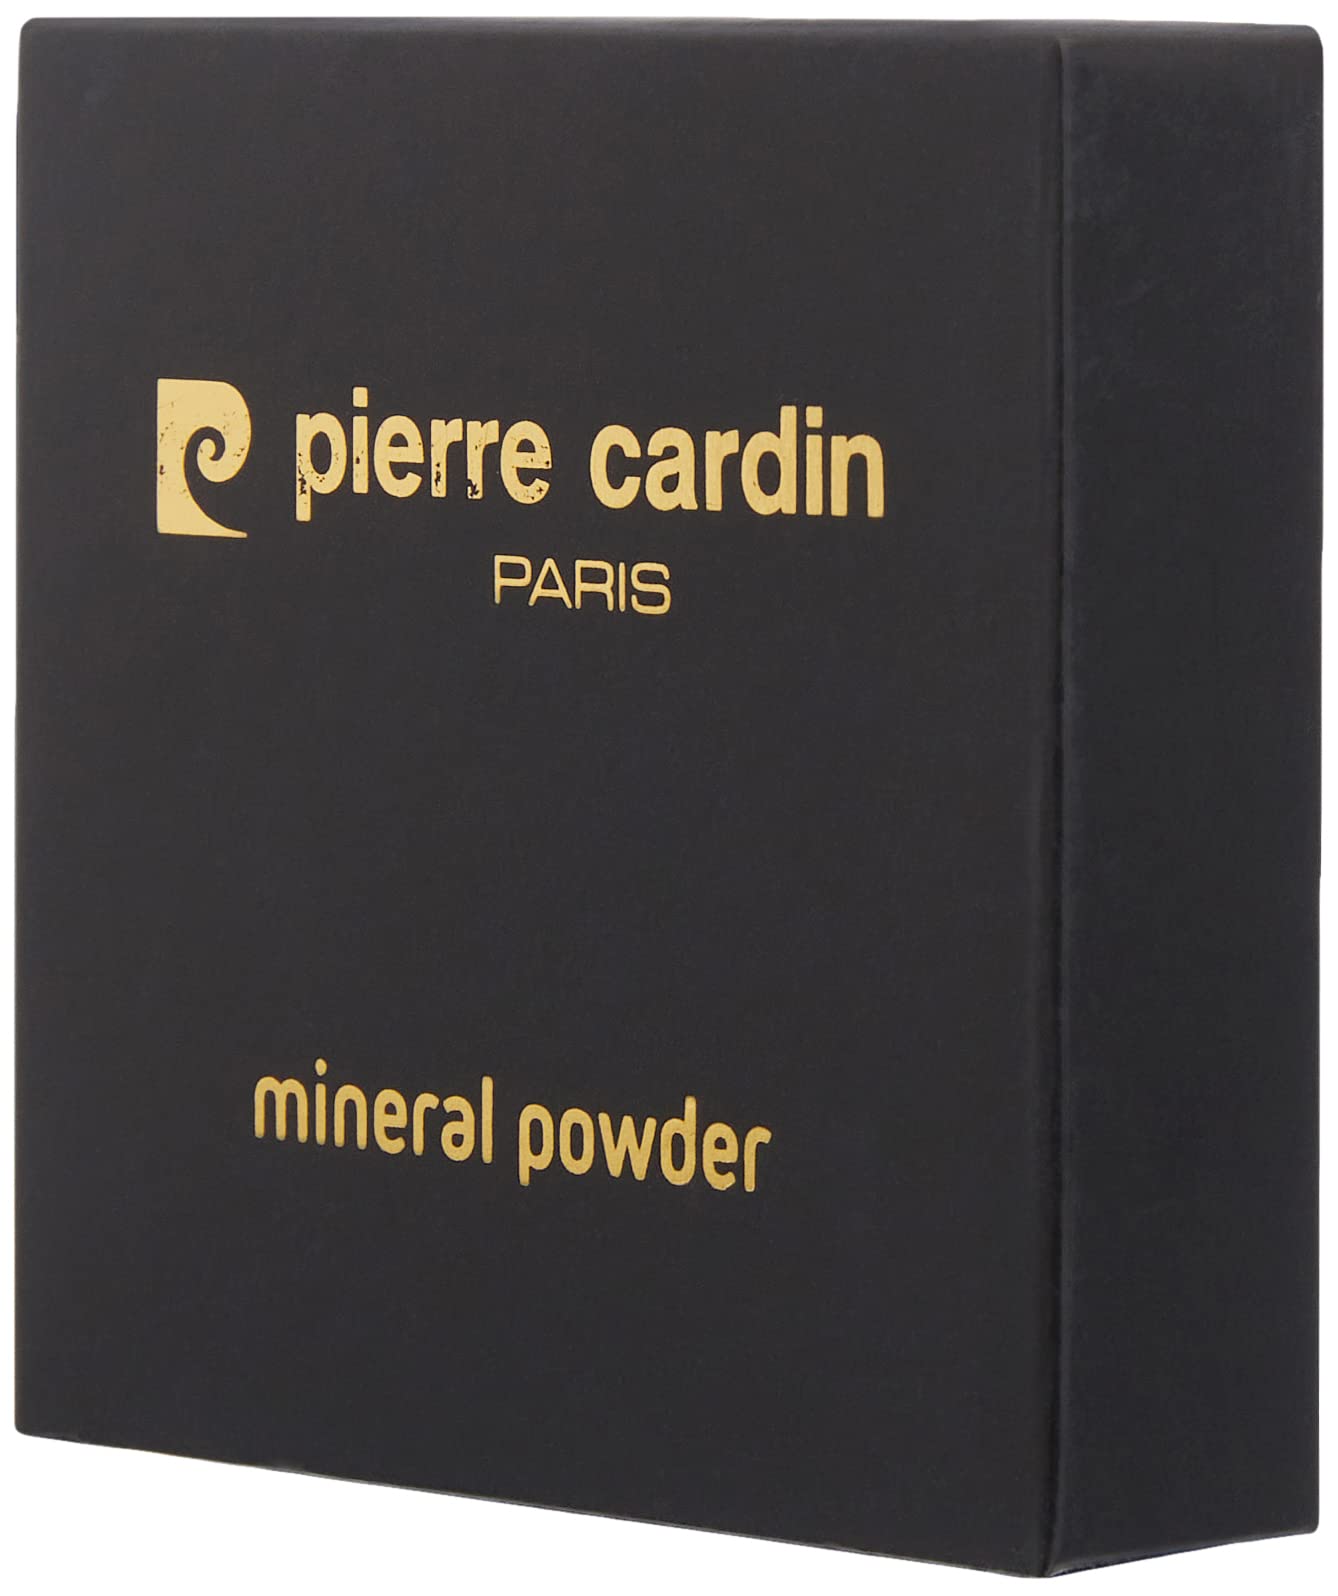 Pierre Cardin Paris, Weightless Mineral Powder, Smooth Skin-like Finish, Minimizes Fine Lines & Pores, For Oily Skin (612-Neutral Sand)